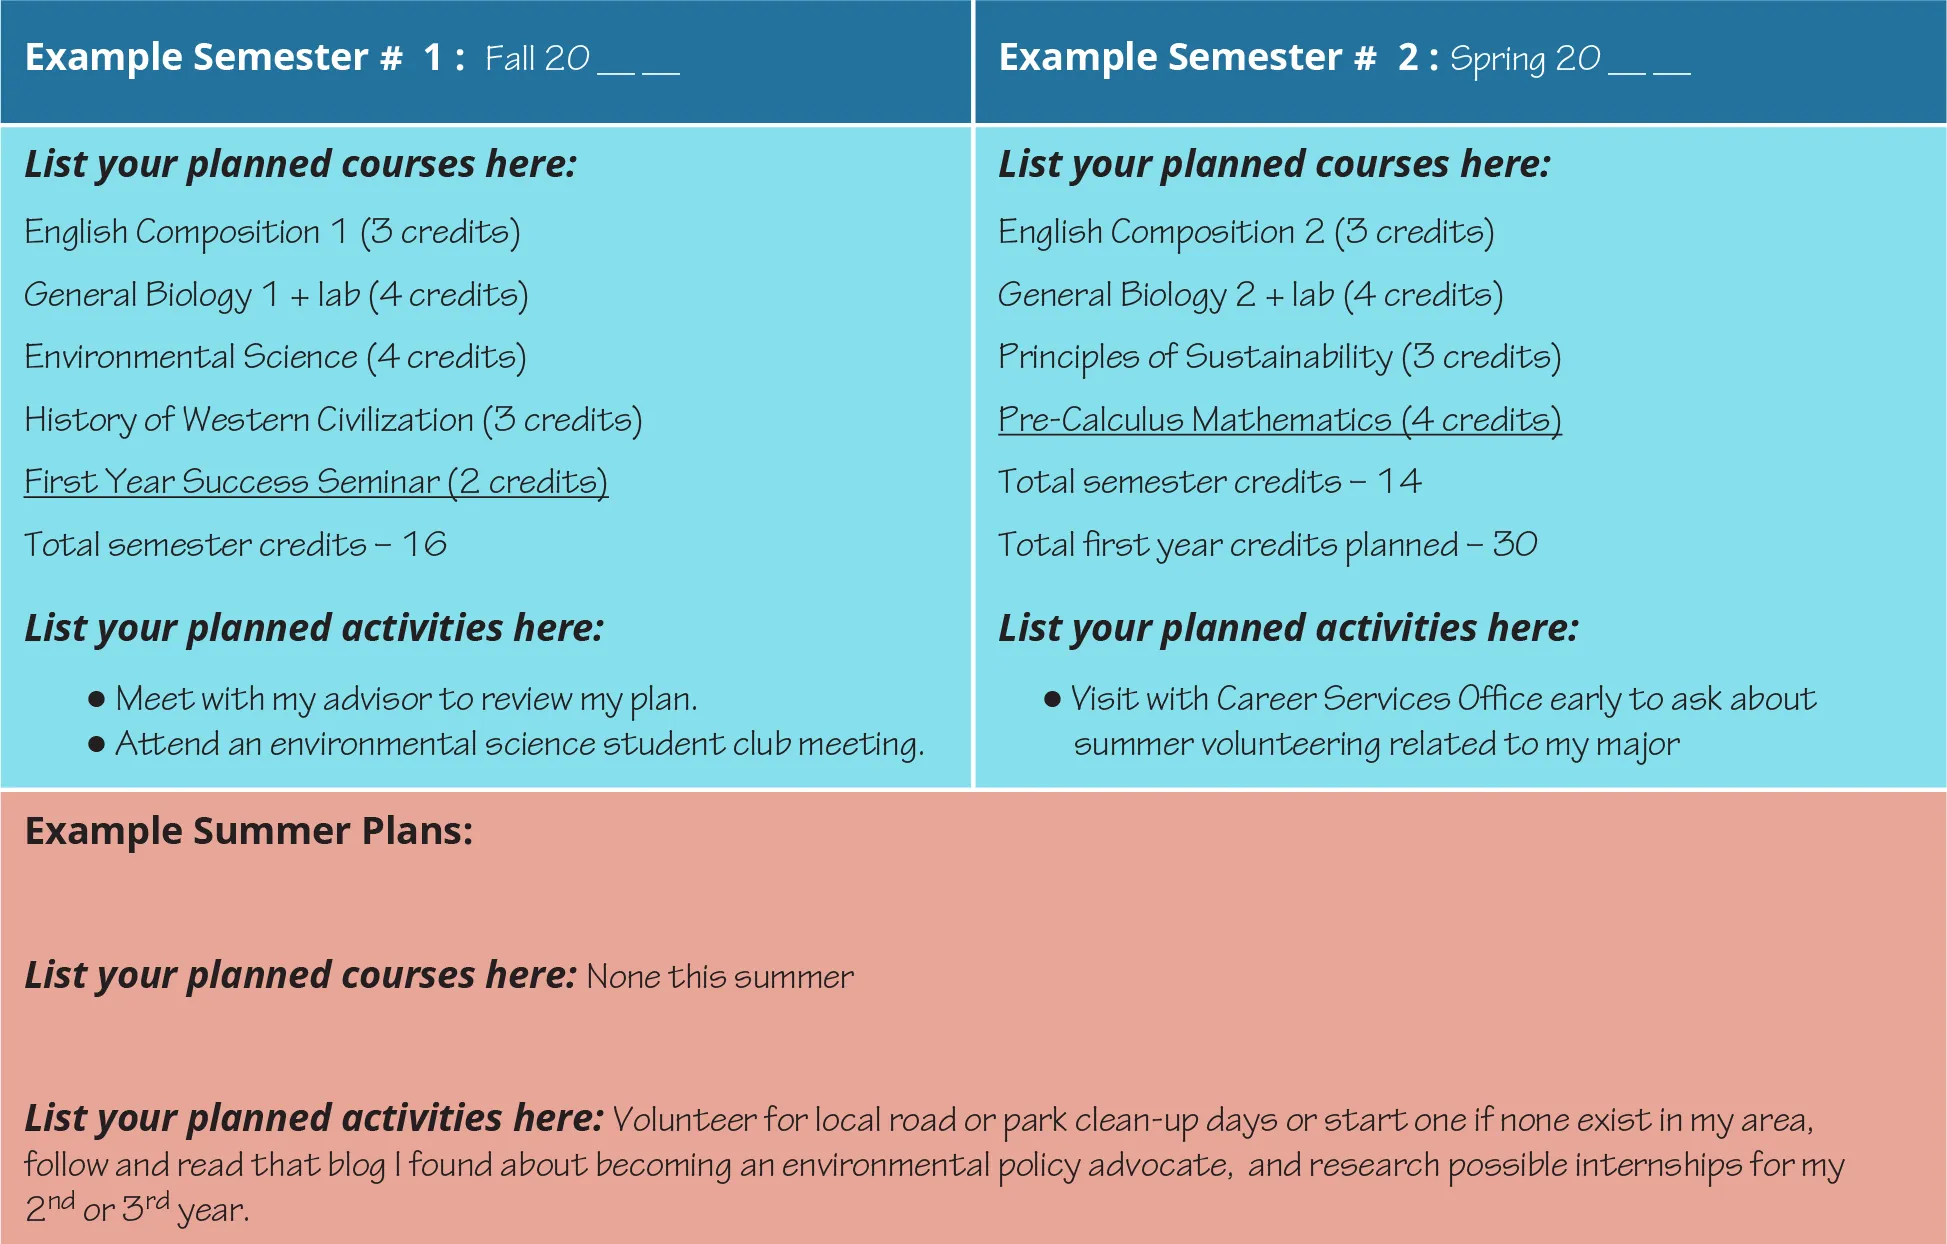 A sample grid diagram shows students’ planning for different semesters, including planned activities, summer plans, and planned courses.